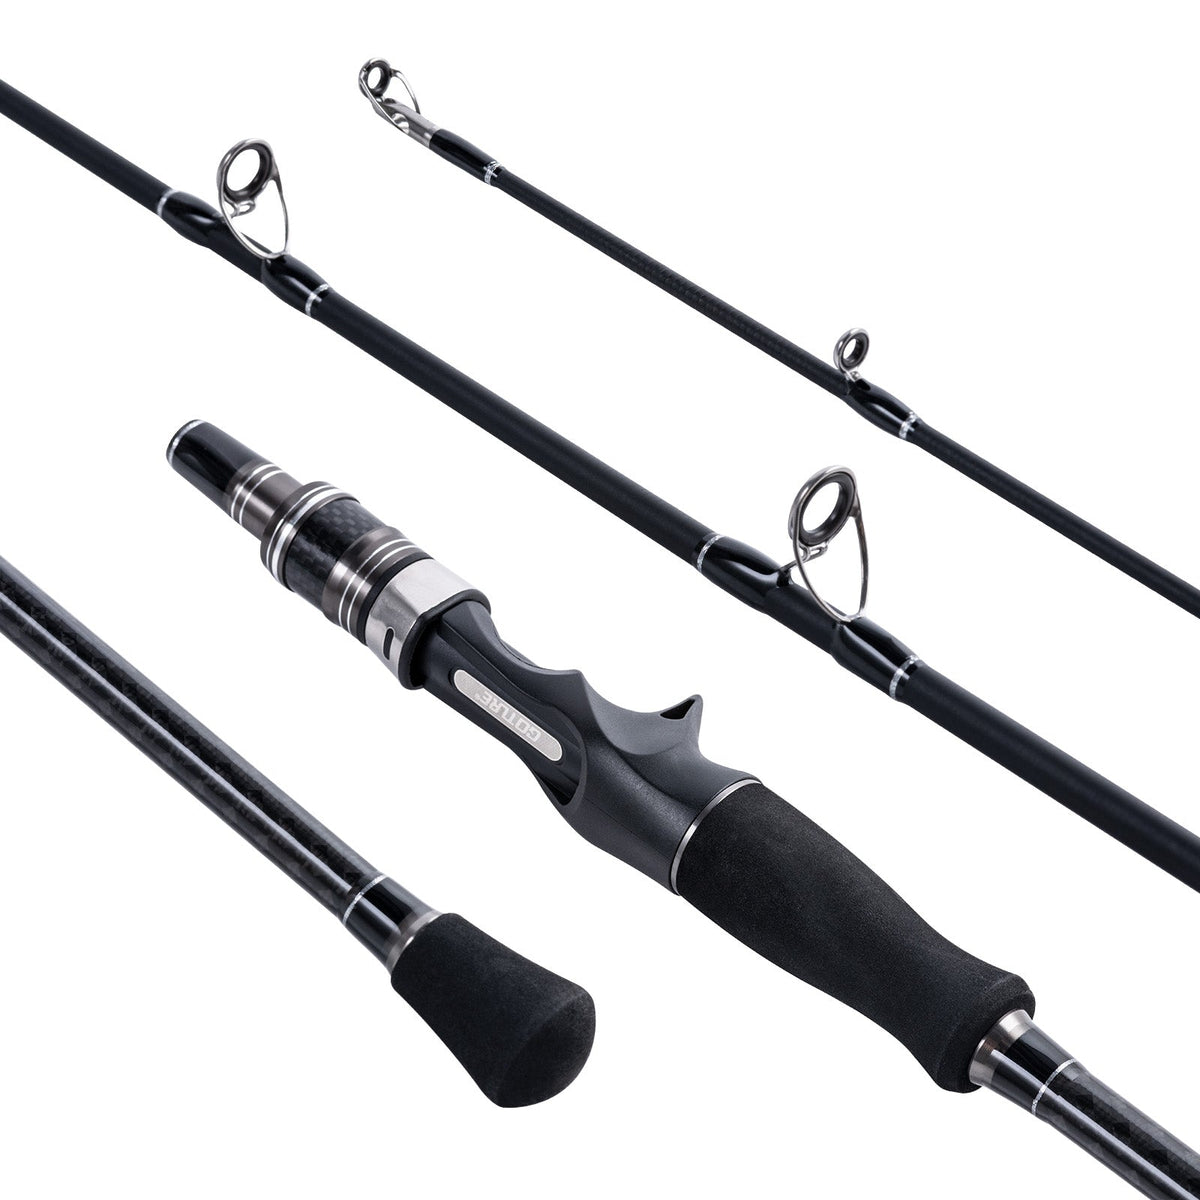 Goture SWORD Telescopic Fishing Rod Carbon 2.1M-3.6M Sea Boat Jigging  Travel Spinning Fishing Rod Surf Trolling Offshore Rods - Price history &  Review, AliExpress Seller - Goture Official Store